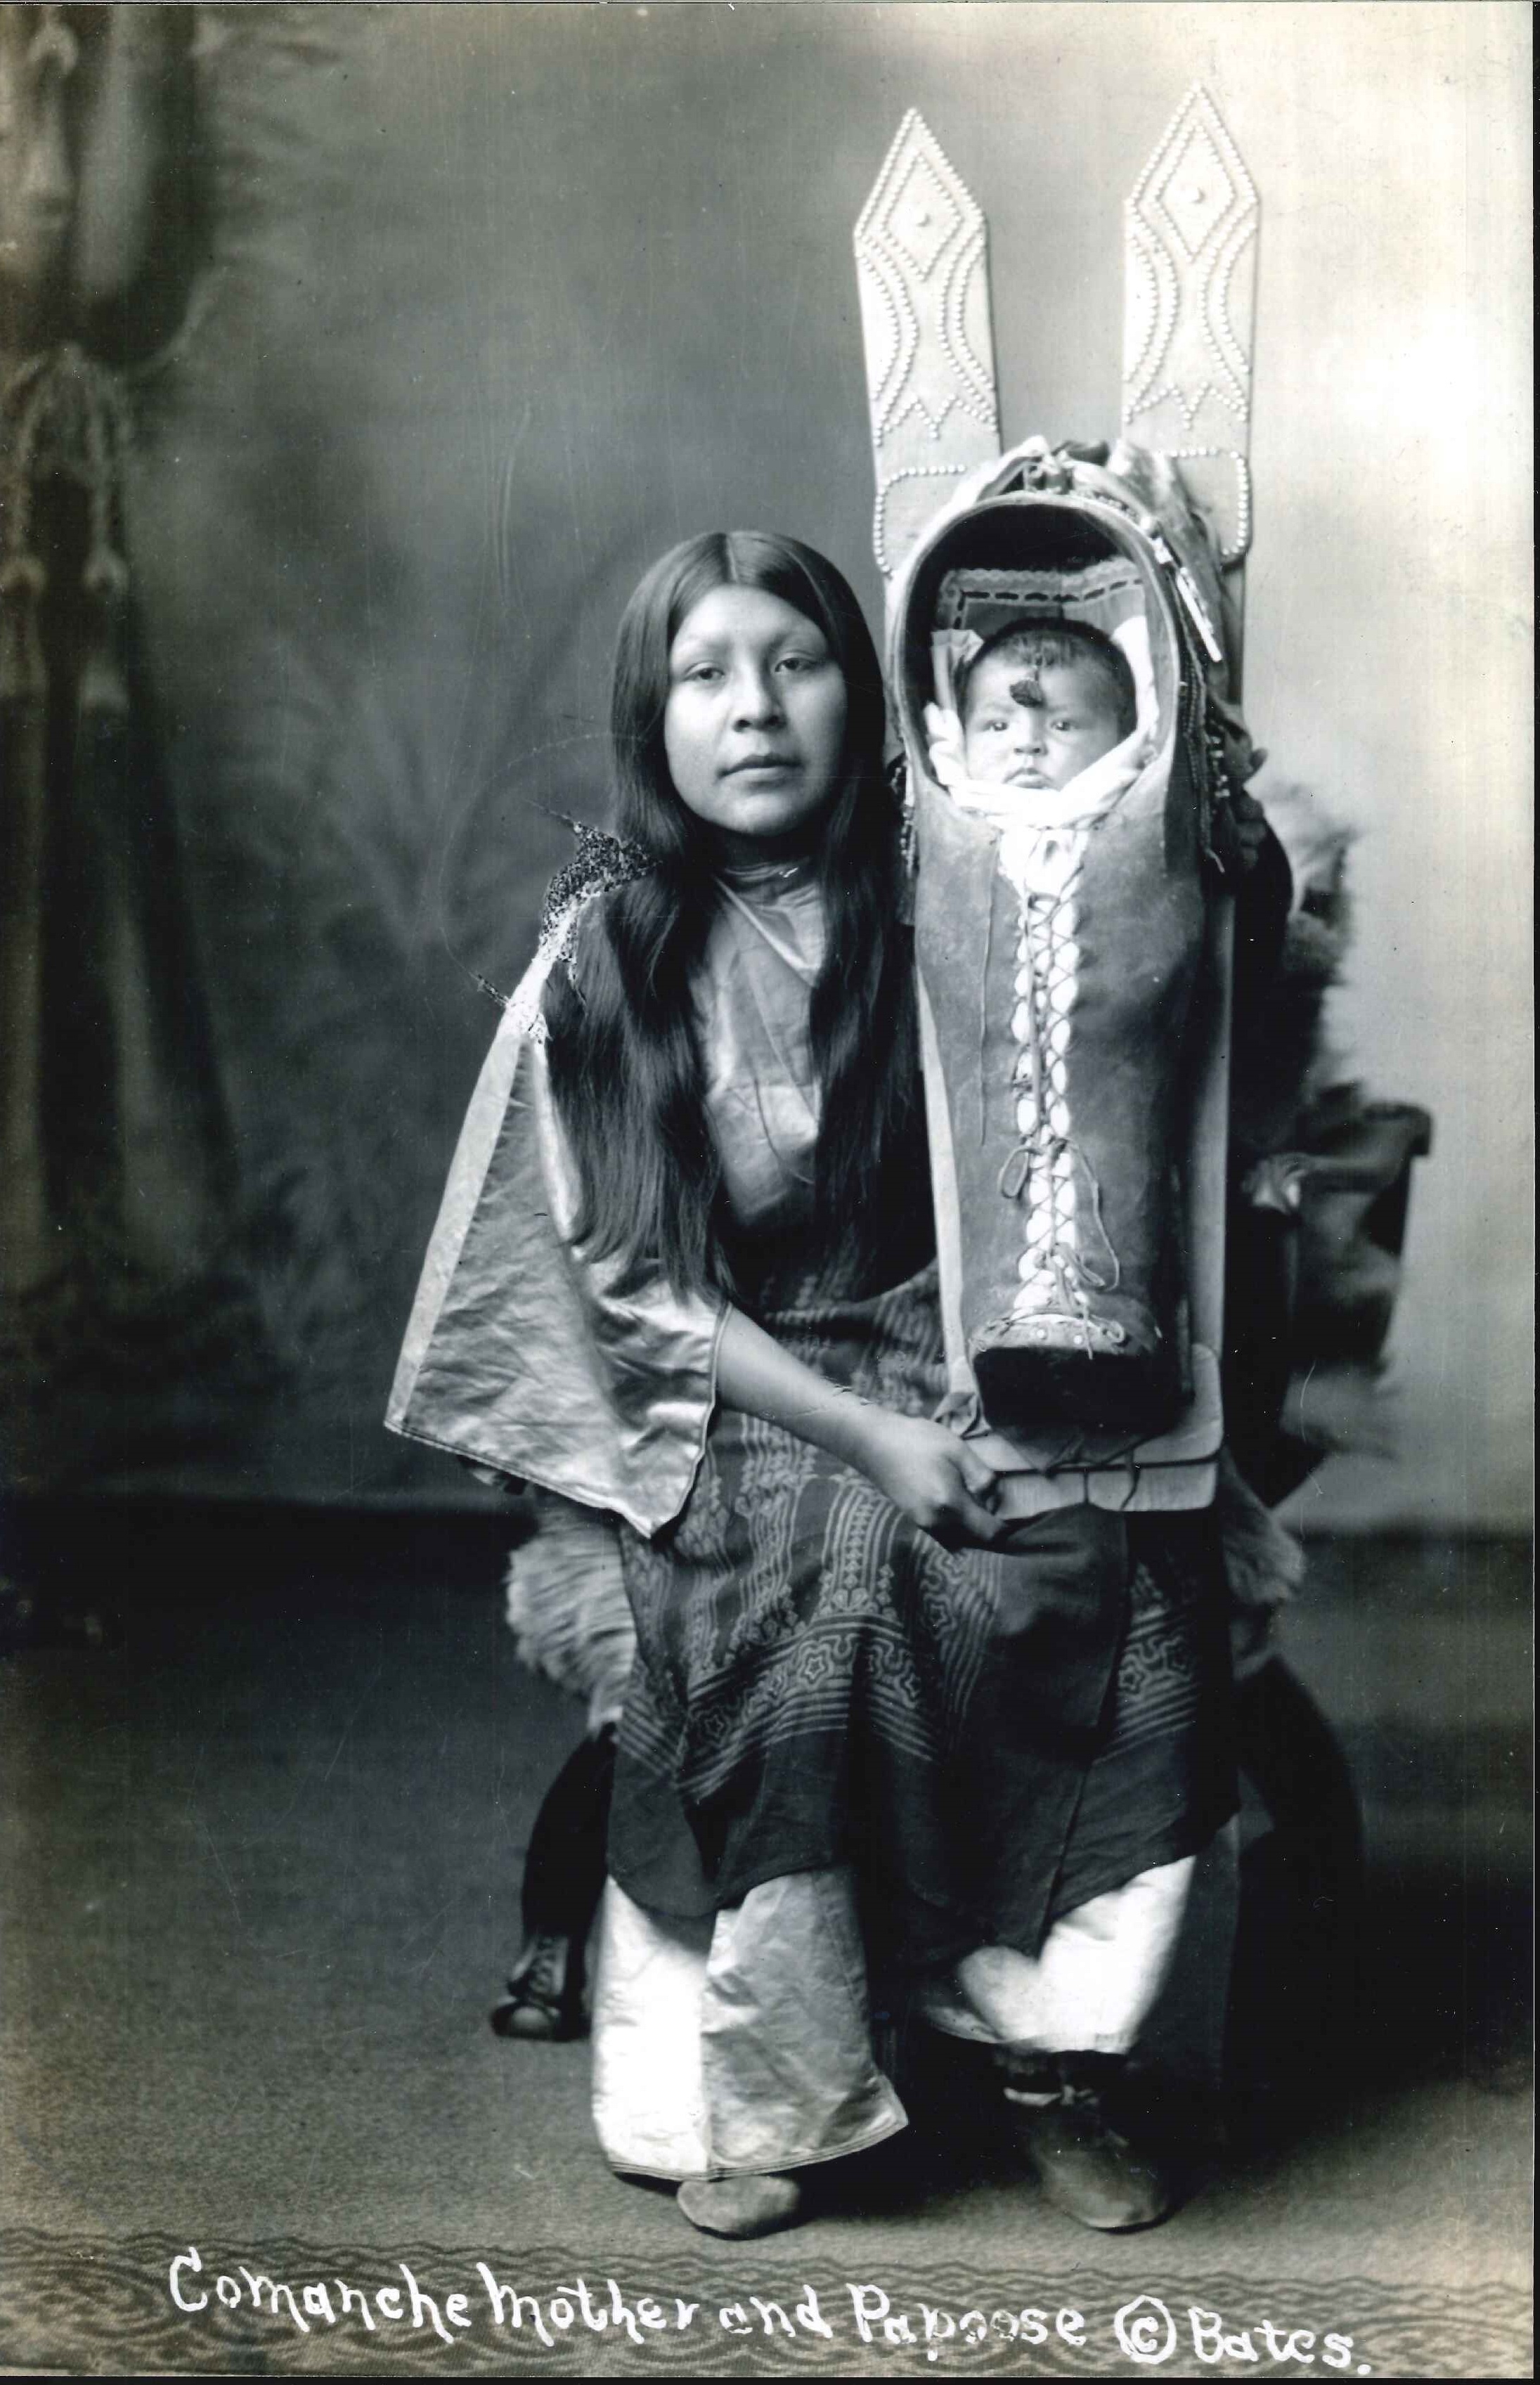 Comanche Mother and Papoose